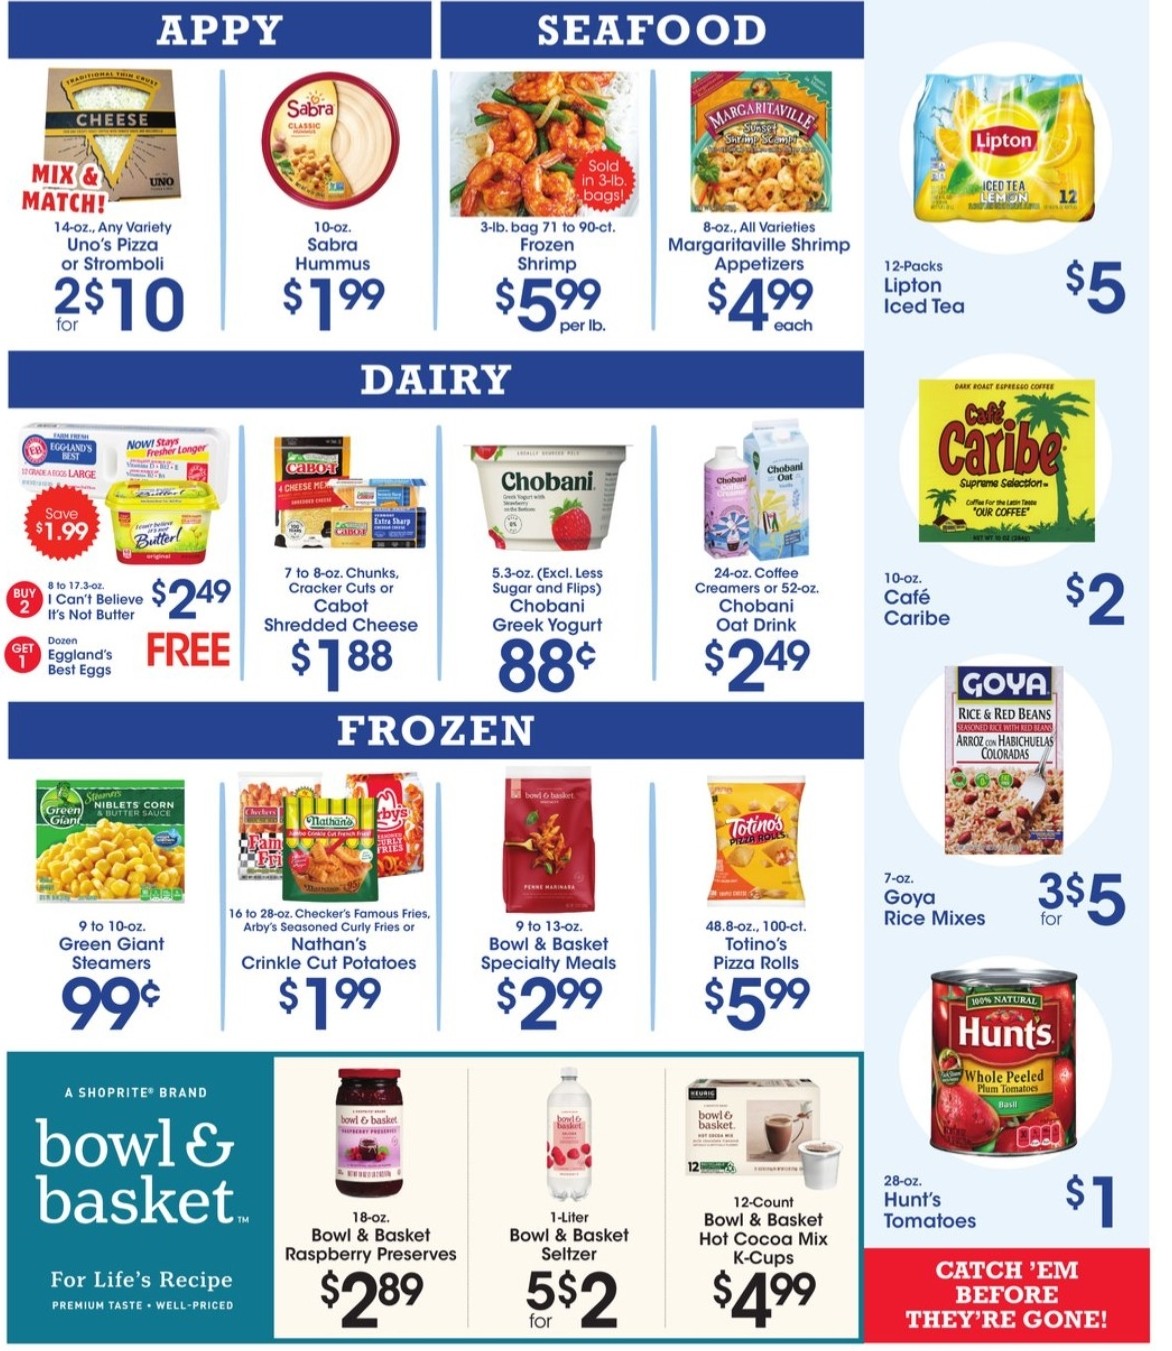 Price Rite Weekly Ad from October 16